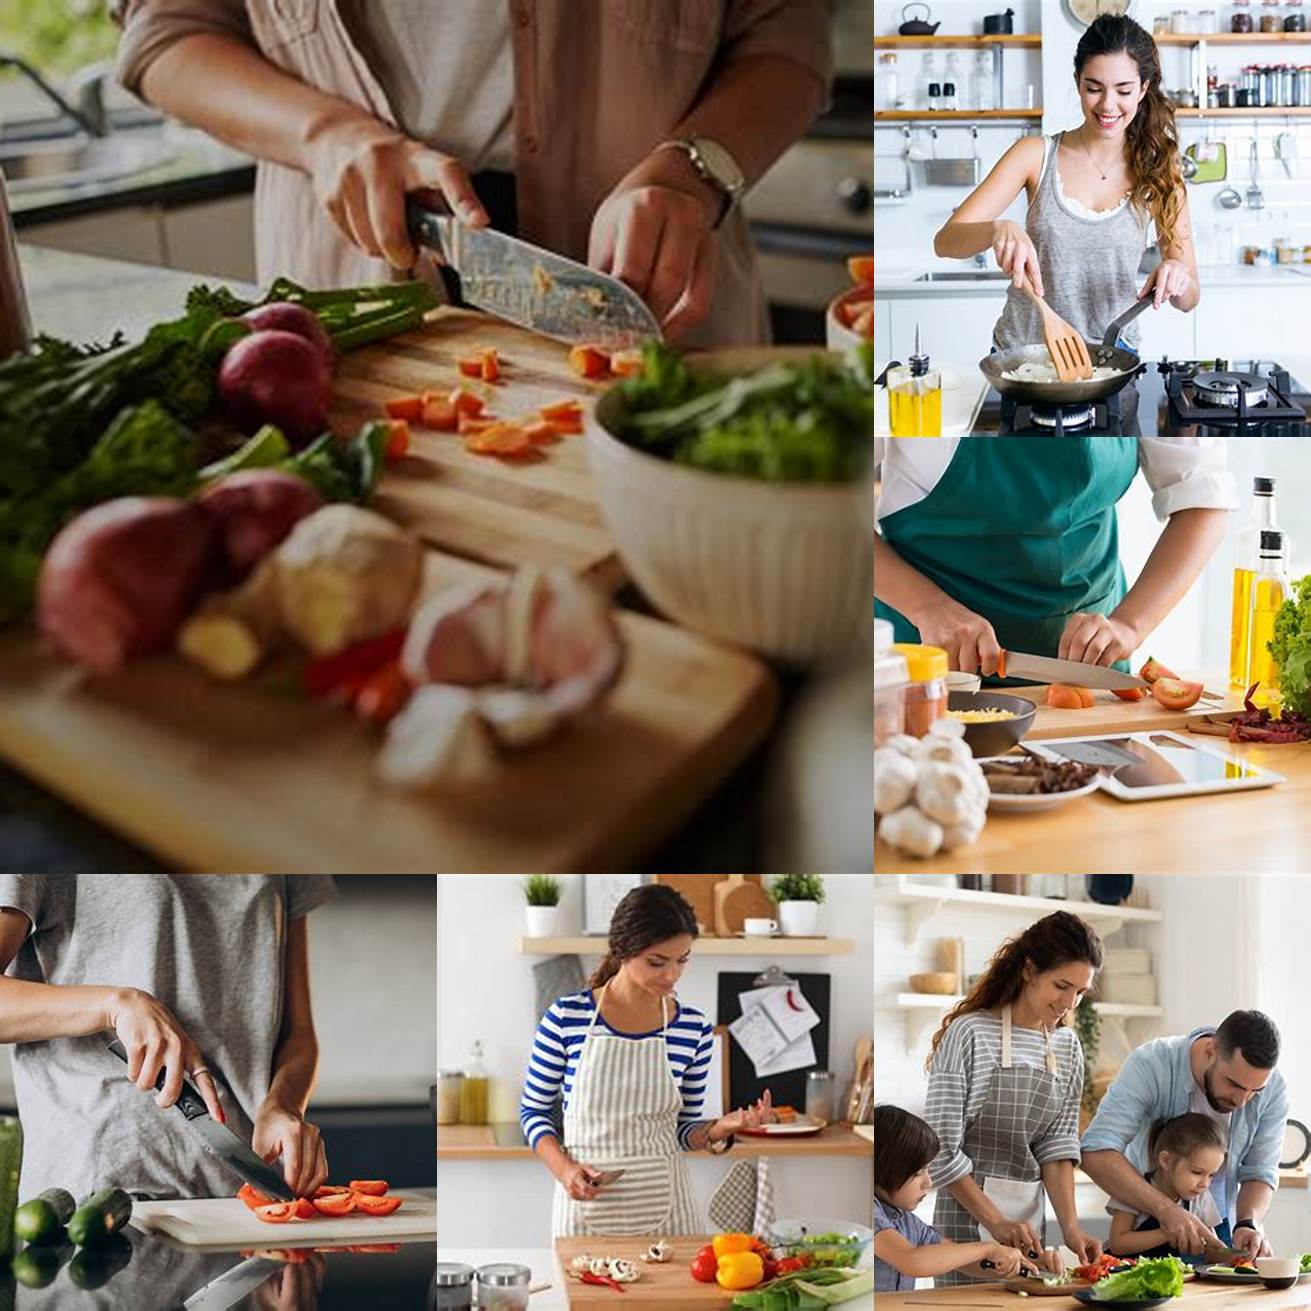 1 Improves visibility for cooking and food preparation tasks